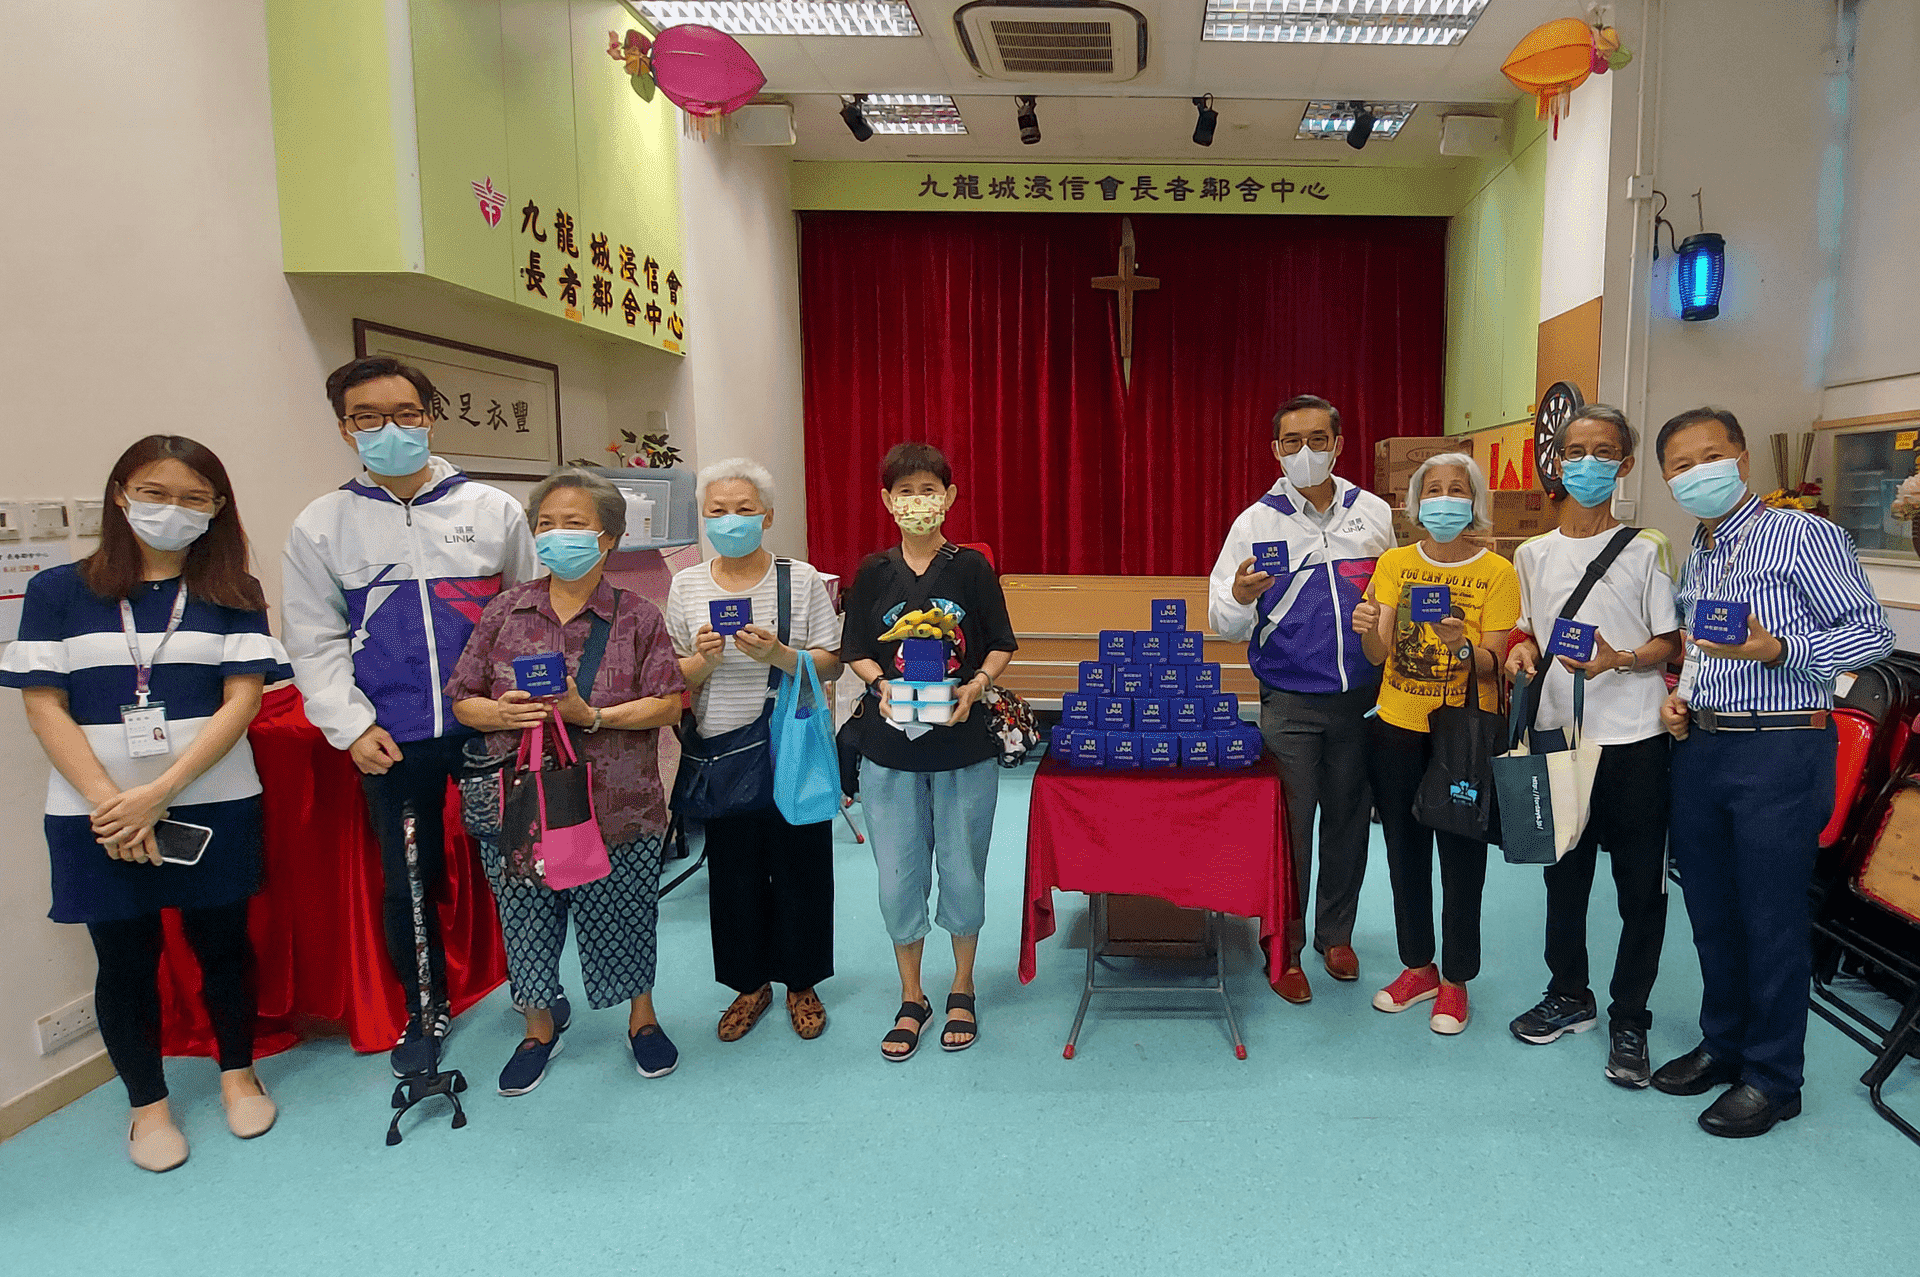 On behalf of Lok Fu district, which accumulated the most mileage among the six participating districts, Link offered 1,000 reduced-sugar mooncakes to residents through five welfare NGOs in Lok Fu district.